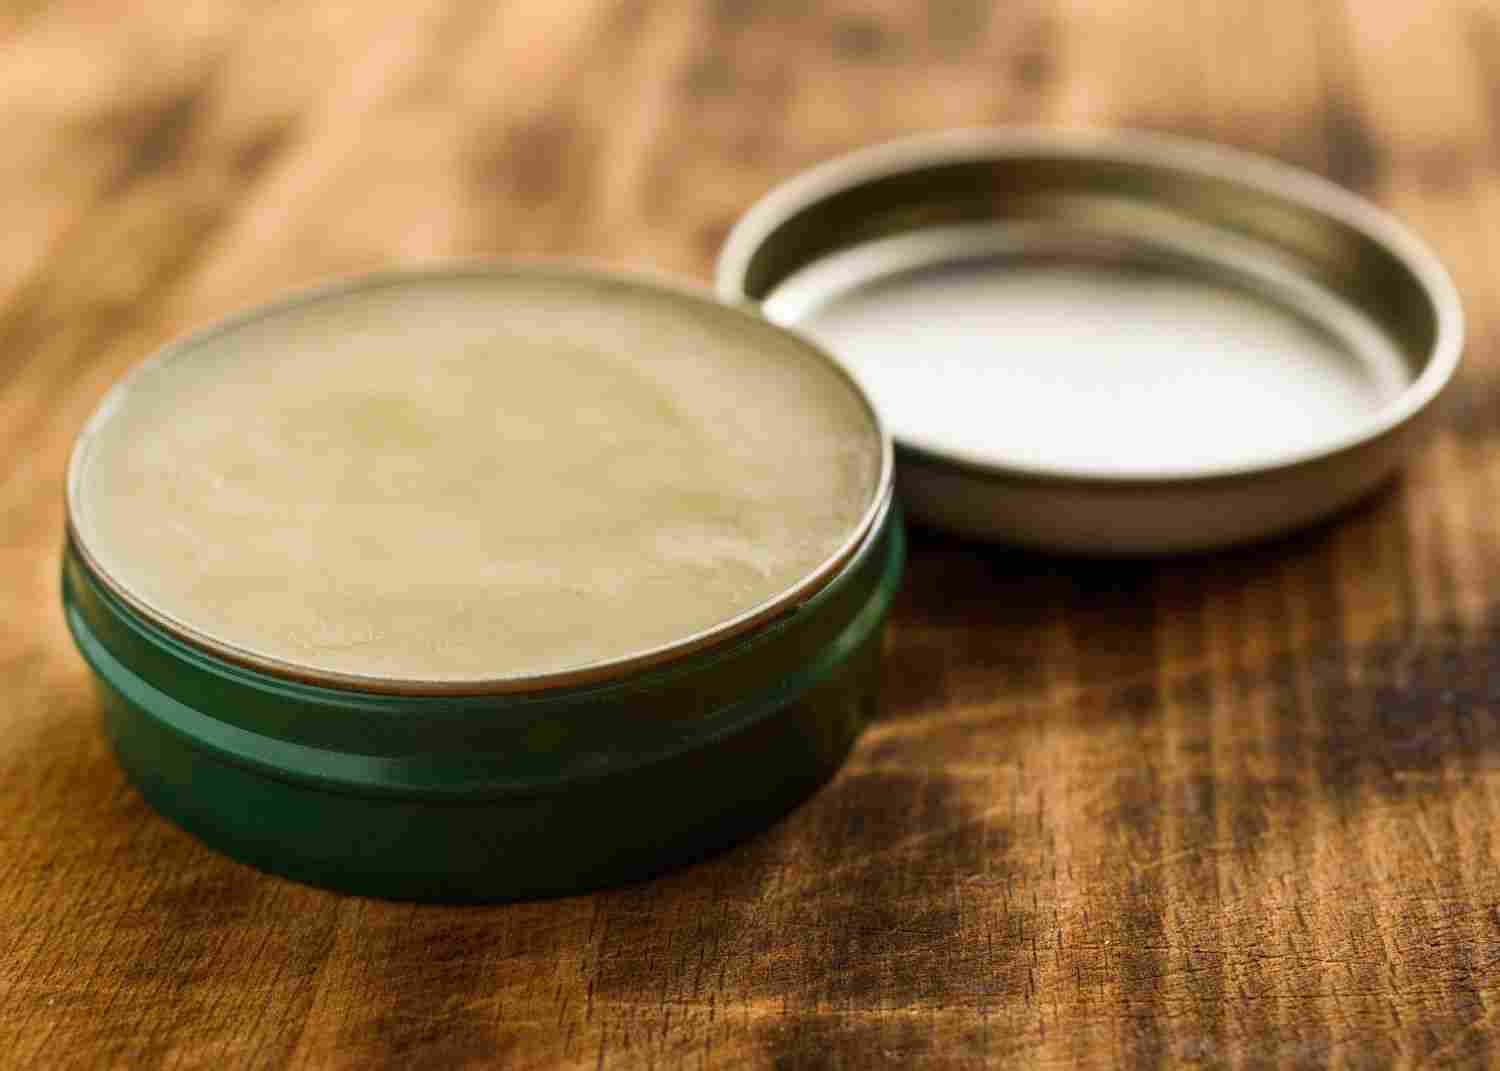 Cream vs. Balm vs. Oil: Which Is Best for Your Skin?